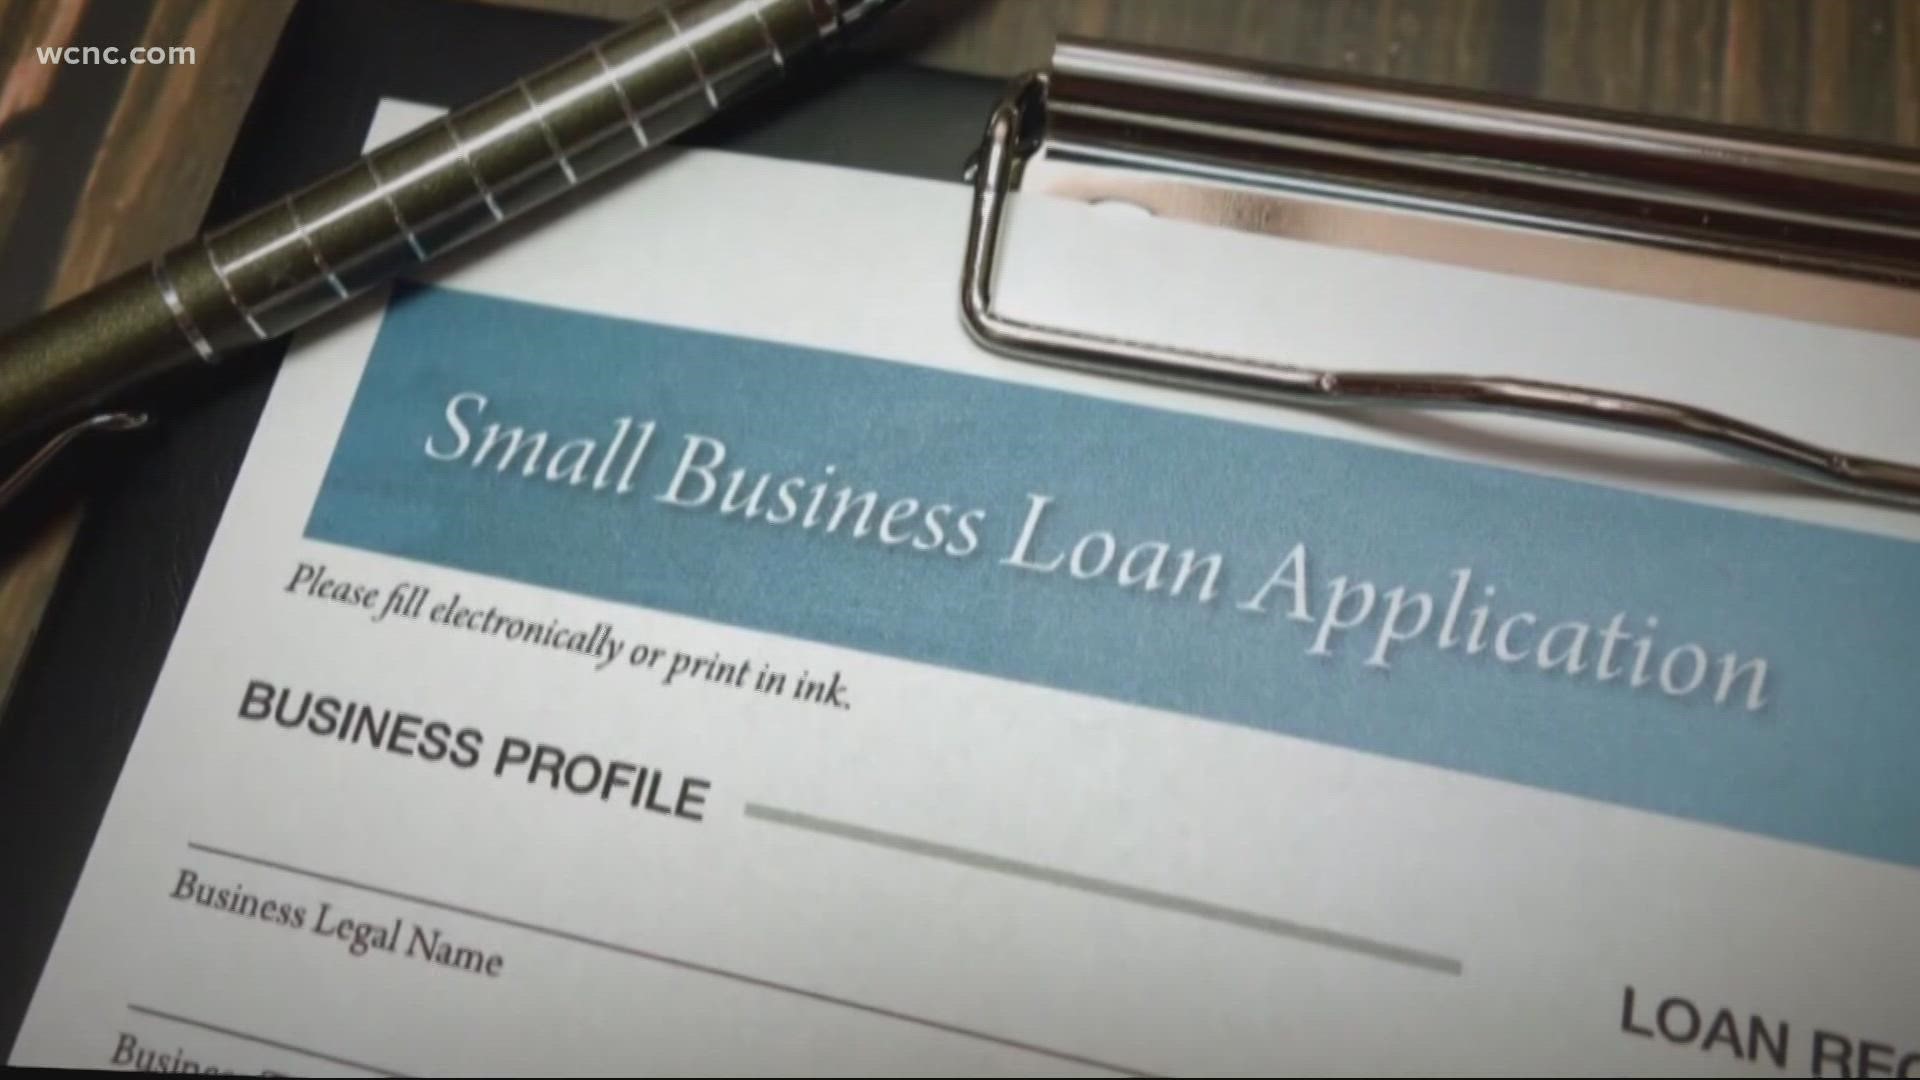 WCNC found the Small Business Administration invited businesses to apply for pandemic grants, but then improperly denied their applications.